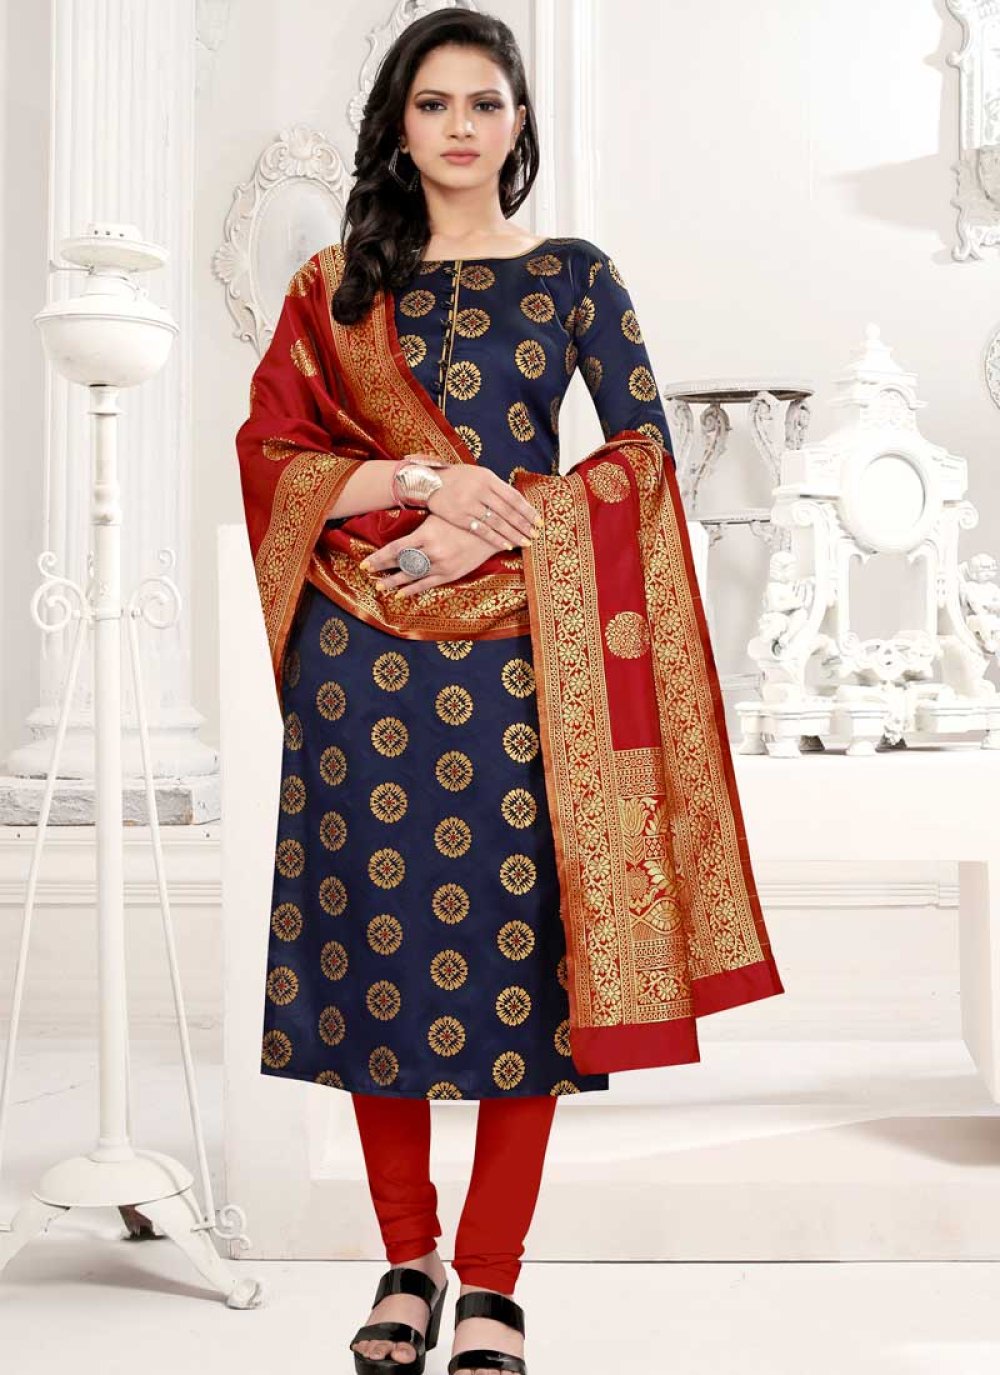 https://d3nsby4zkkv8rx.cloudfront.net/image/cache/data/navy-blue-and-red-cotton-silk-trendy-churidar-salwar-suit-90445-1000x1375.jpg